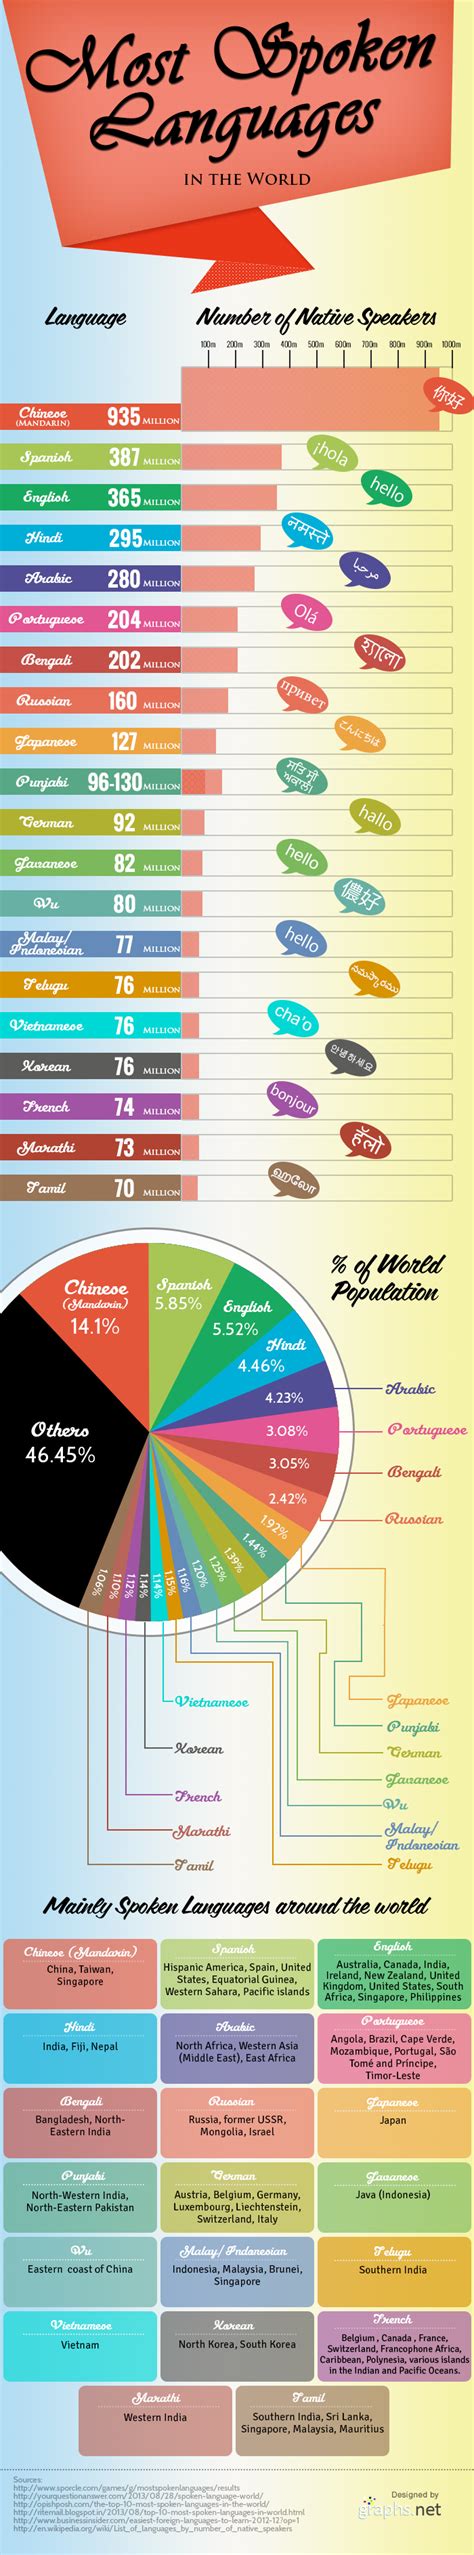 Most Spoken Languages In The World - Infographics | Graphs.net